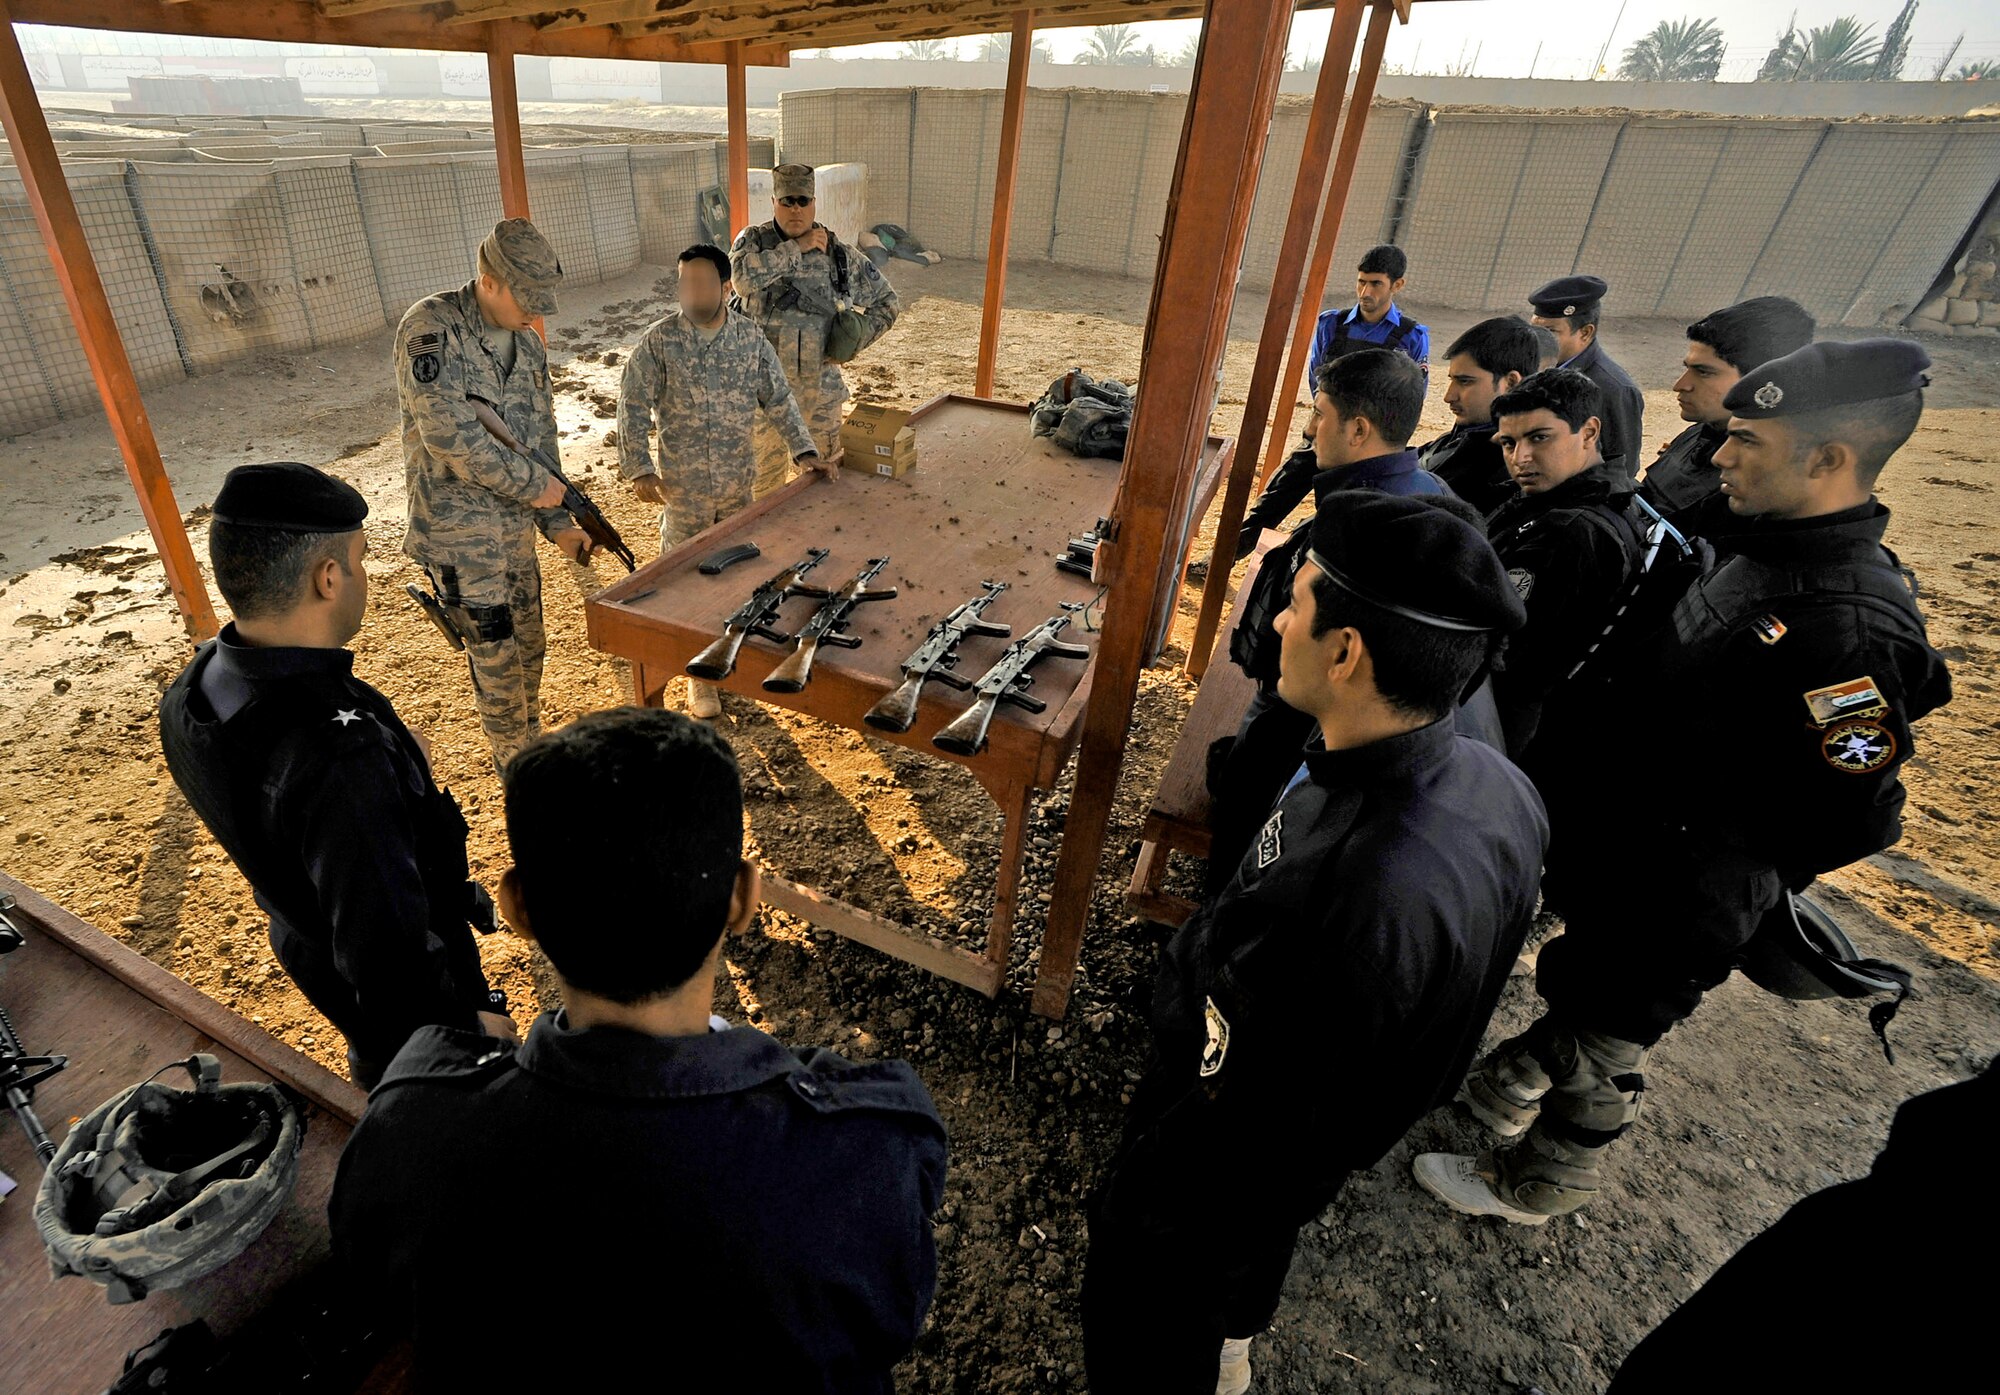 Staff Sgt. Michael Gomez instructs new Iraqi police officers at a firing range Nov. 21, 2009, in Baghdad, Iraq. Sergeant Gomez is assigned to the 732nd Expeditionary Security Forces Squadron Det. 2. (U.S. Air Force photo/Staff Sgt. Angelita Lawrence)